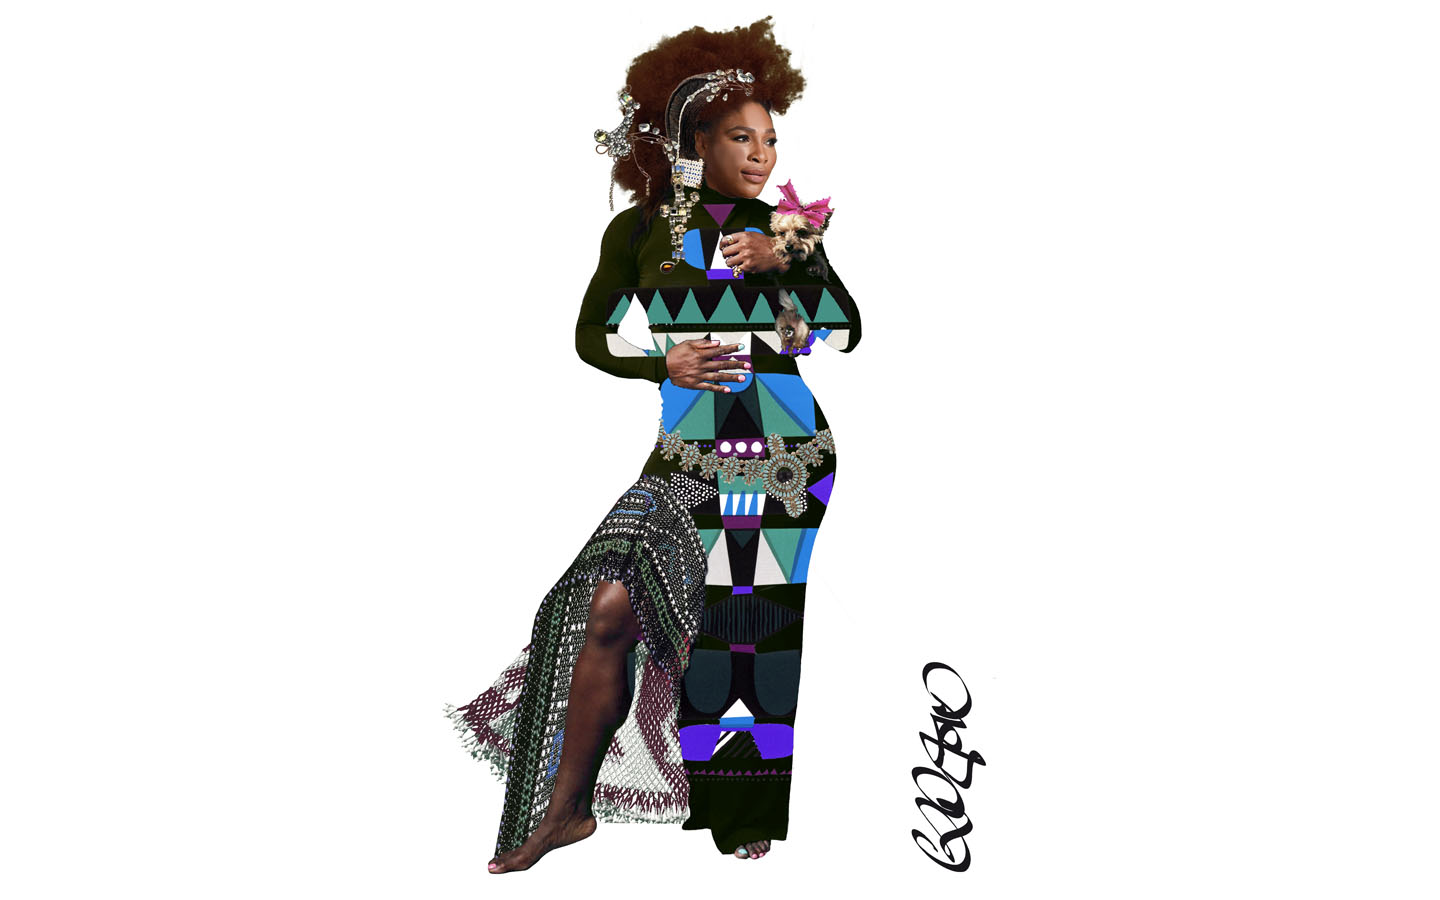 Serena Williams by Christian Lacroix